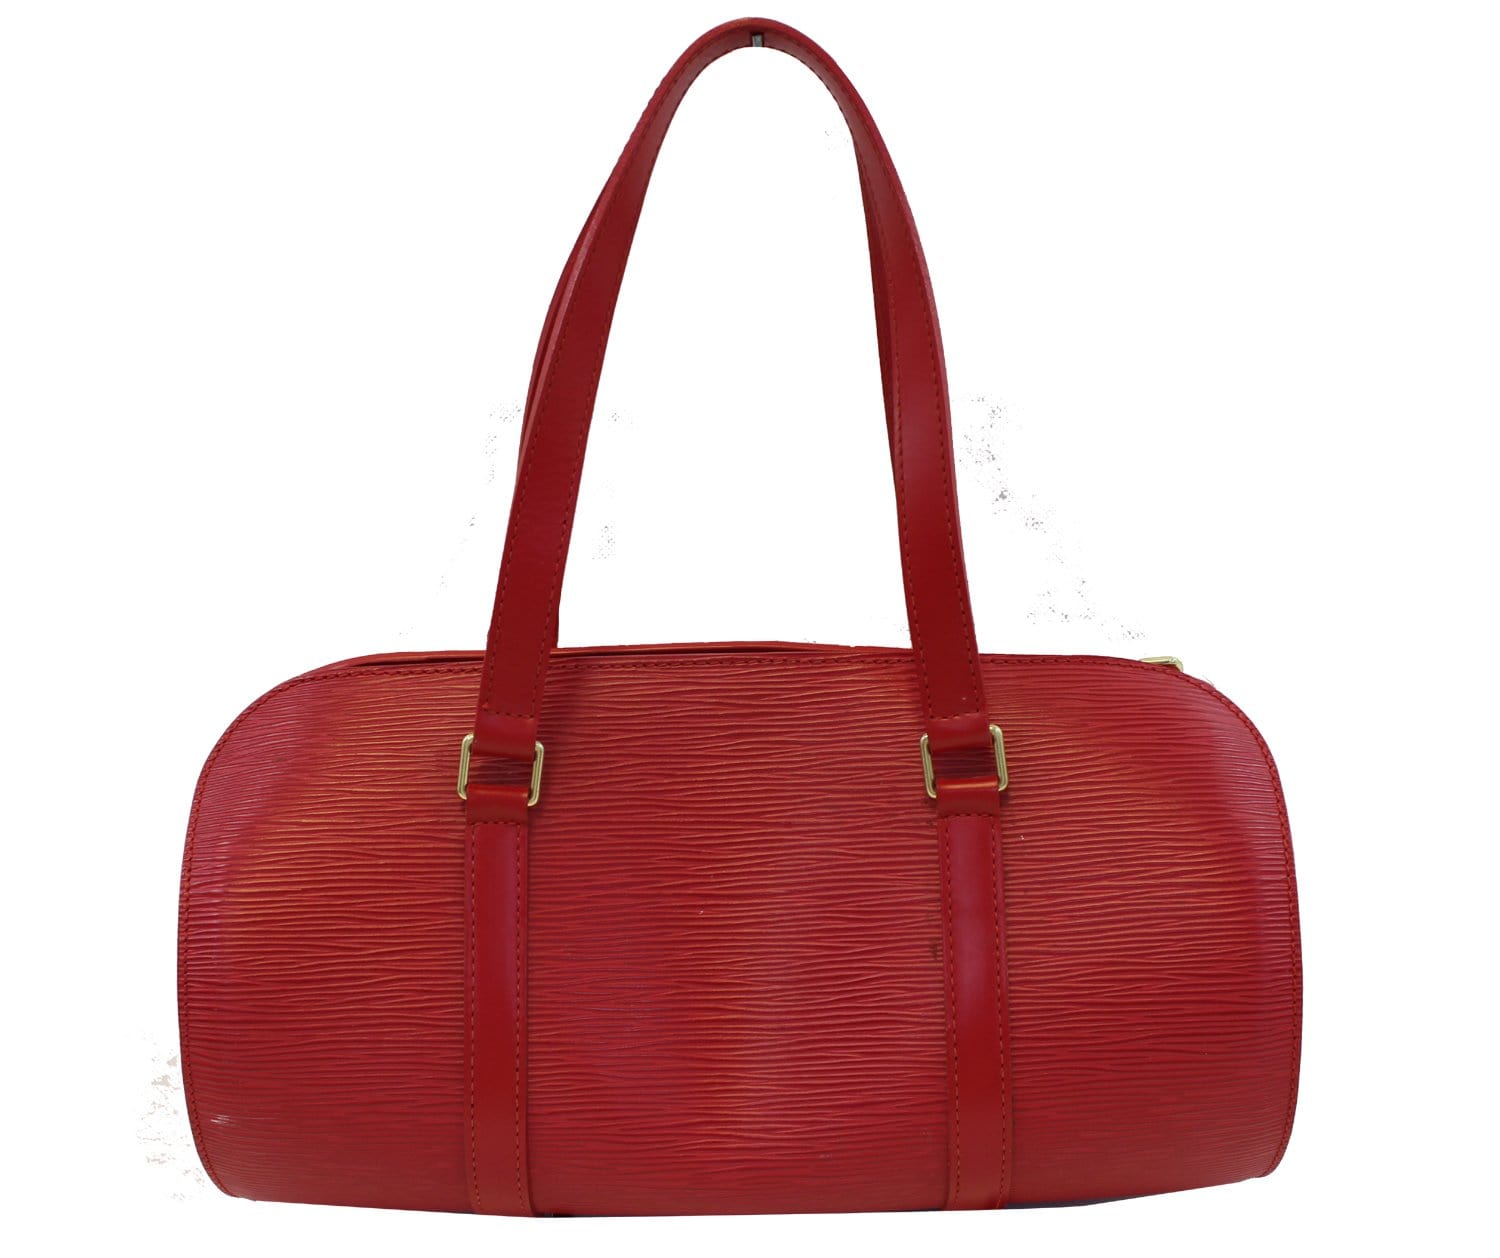 Sold at Auction: A LOUIS VUITTON TUILERIES BAG; red and navy Epi leather  with exterior accents of hot pink, outside pocket features a double-zip  clos